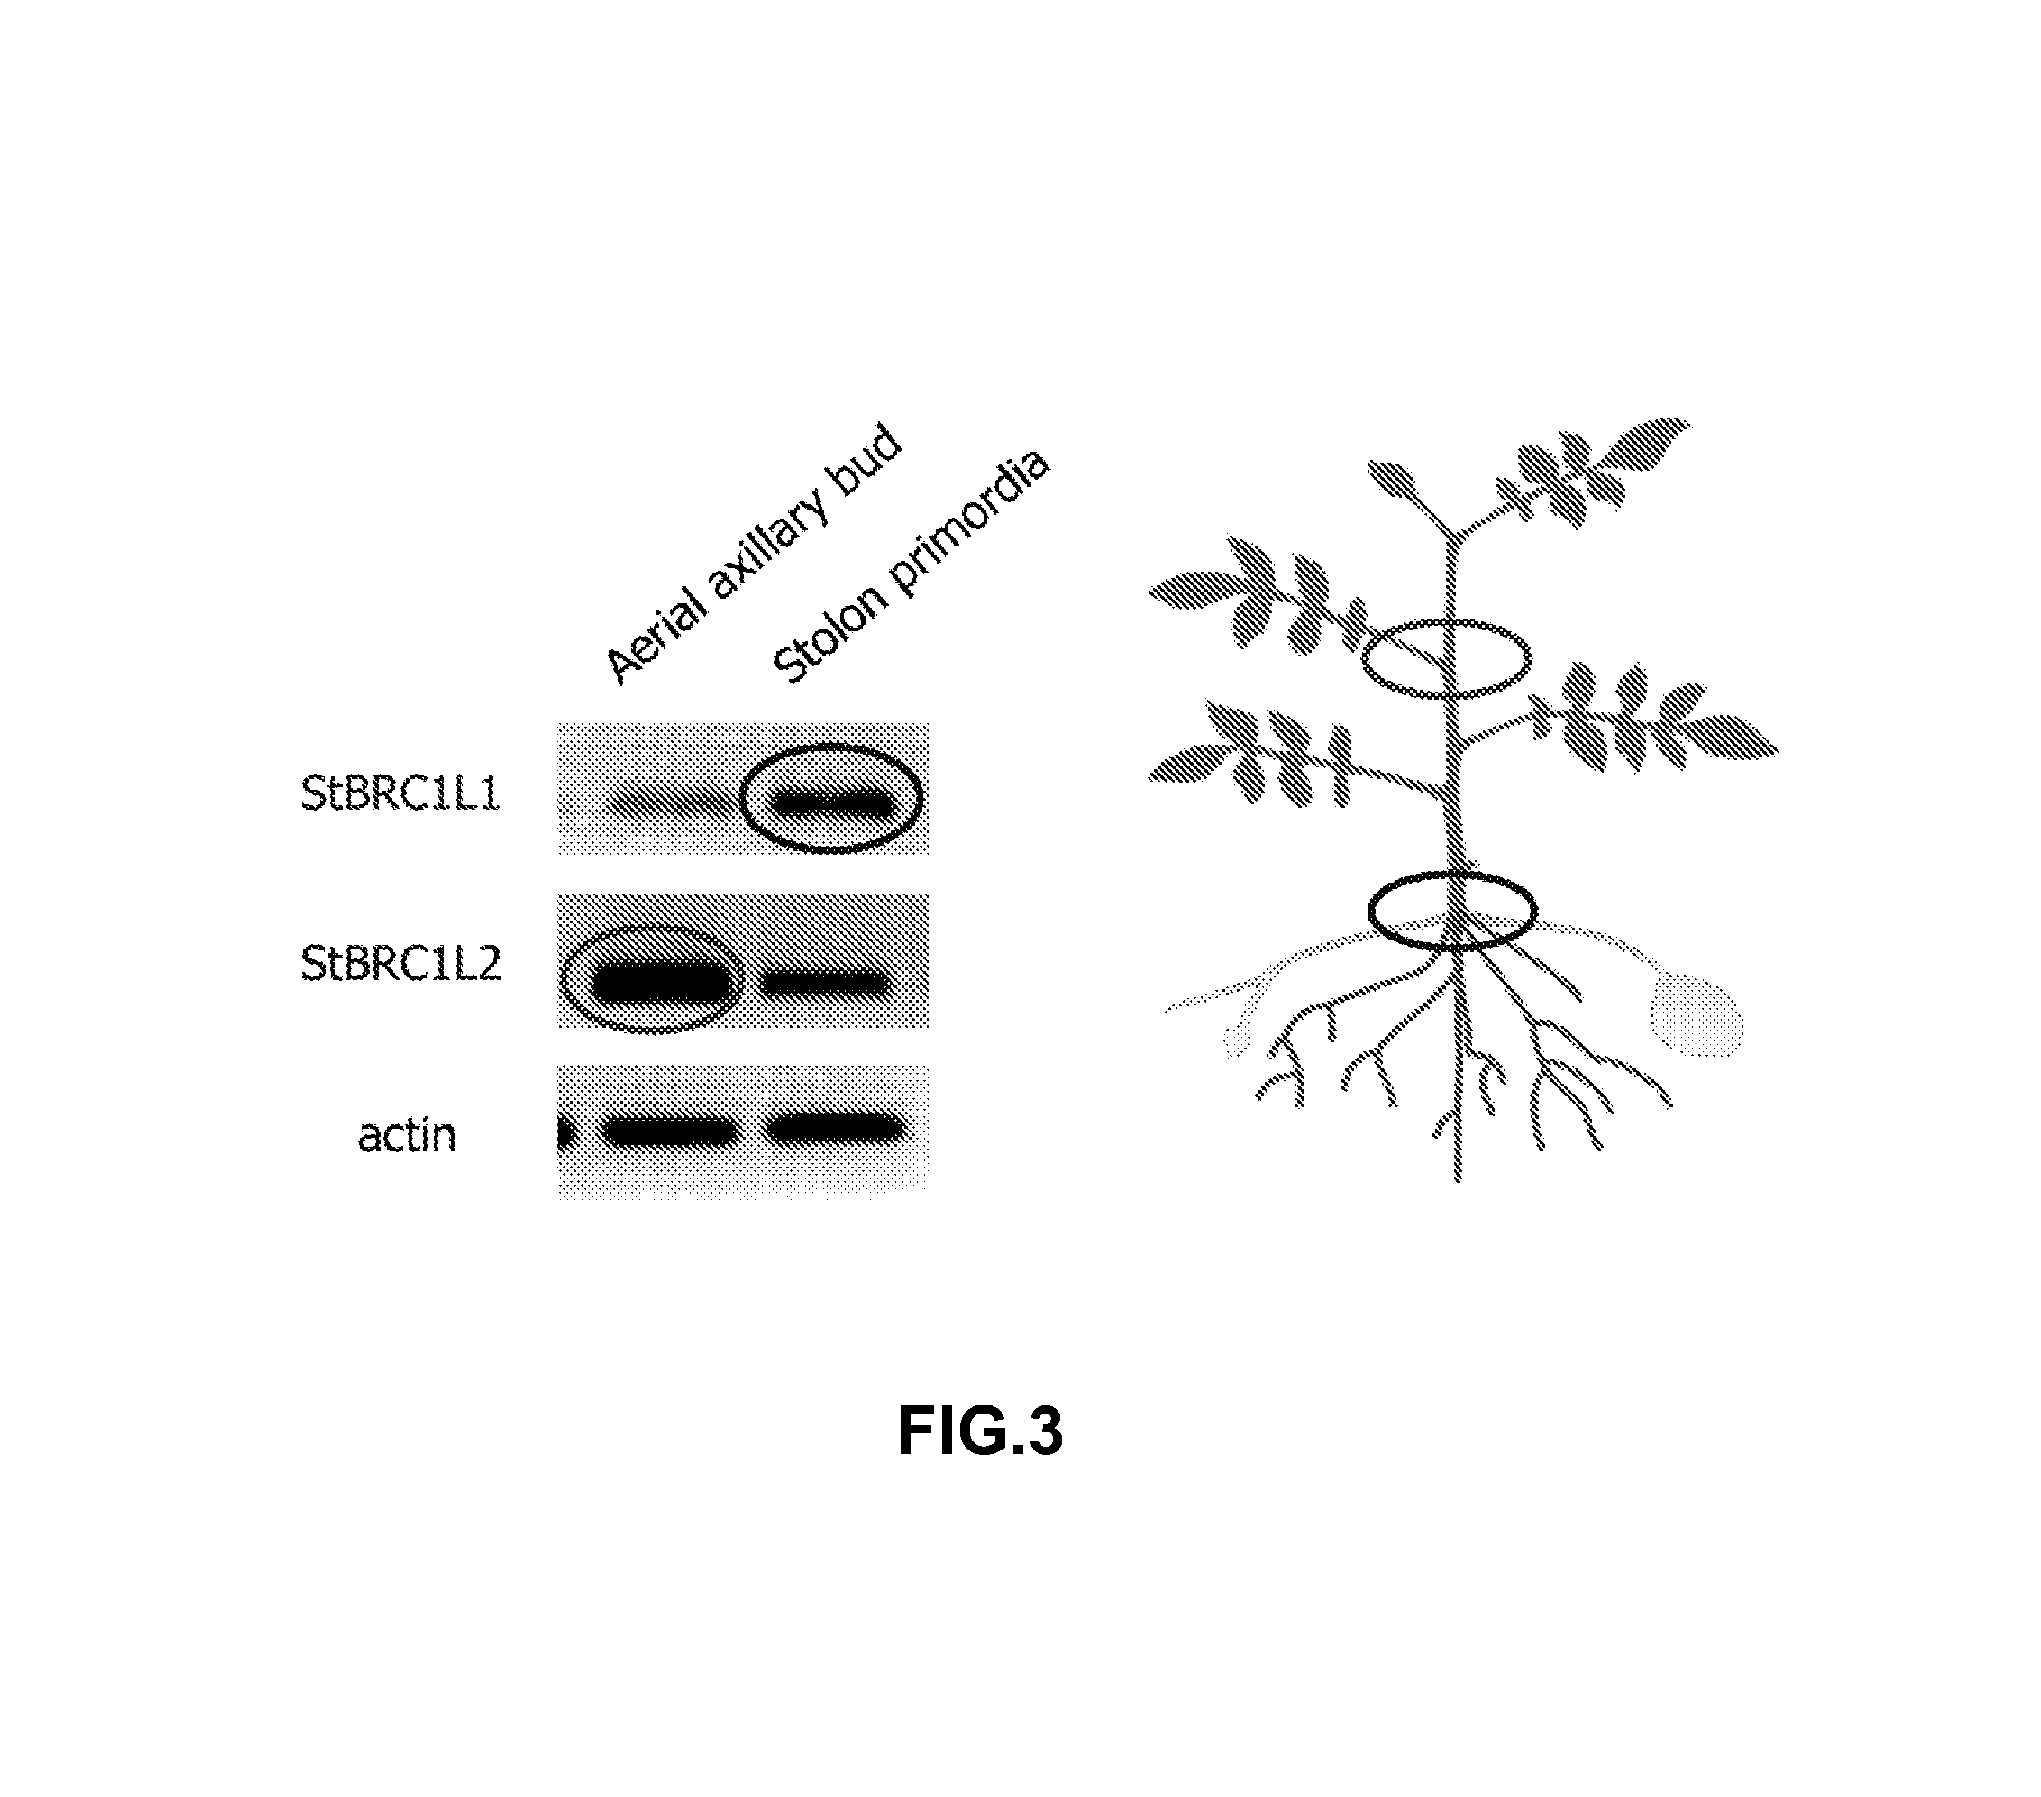 Genes regulating plant branching, promotors, genetic constructs containing same and uses thereof